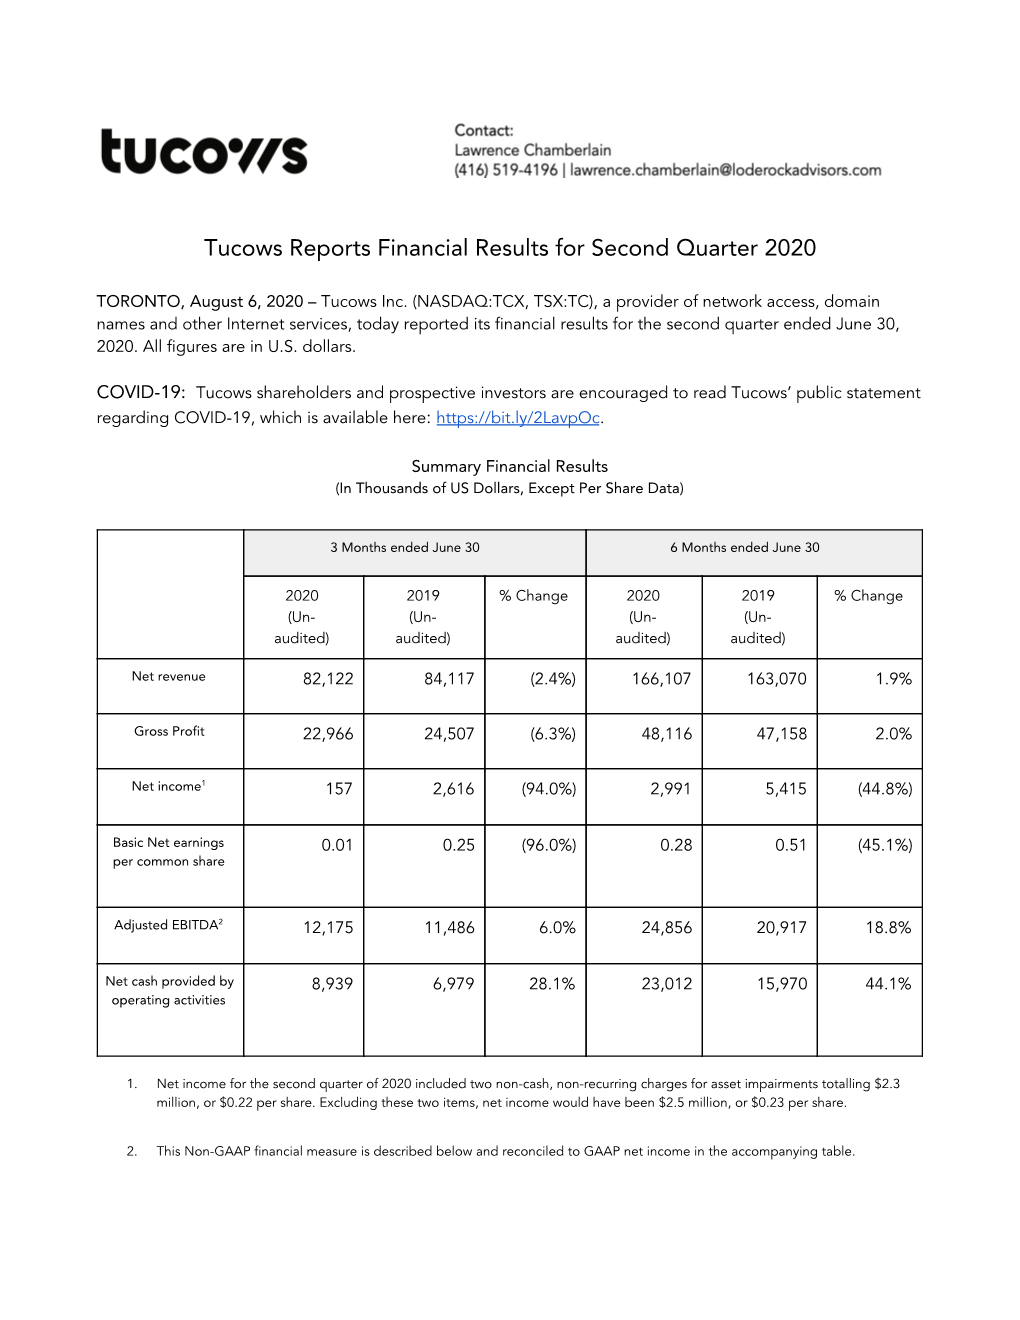 Tucows Reports Financial Results for Second Quarter 2020